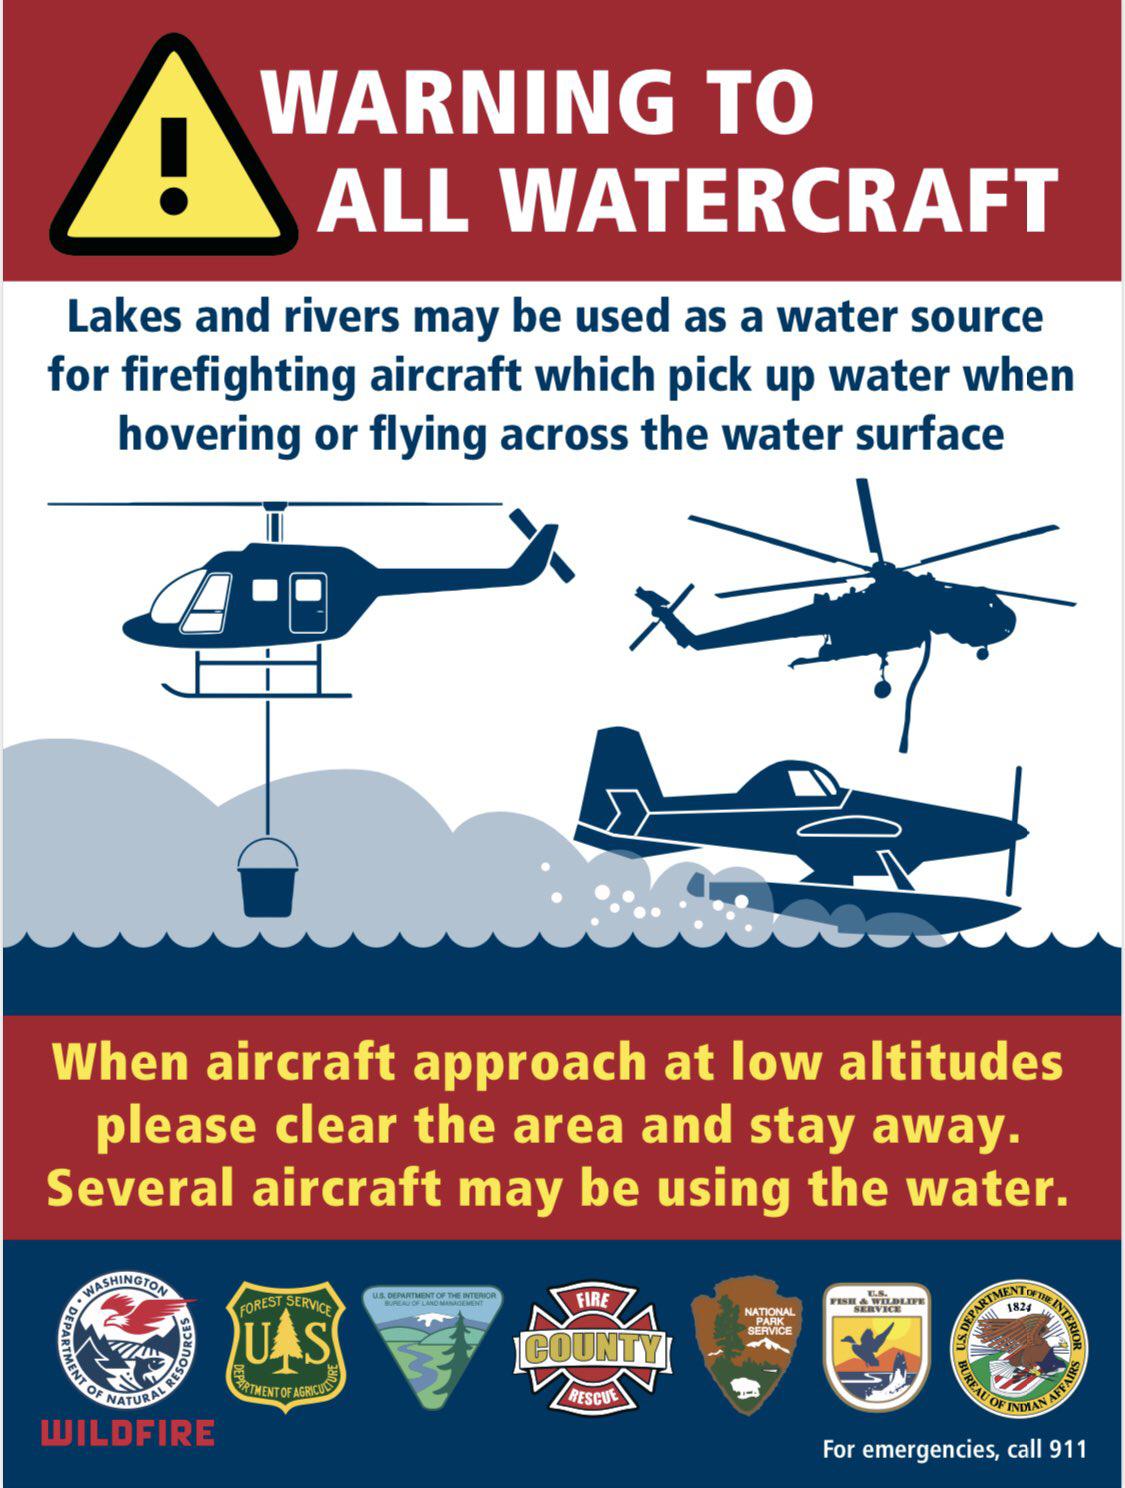 A warning message to all boats to clear the area if they see fire aircraft utilizing the area